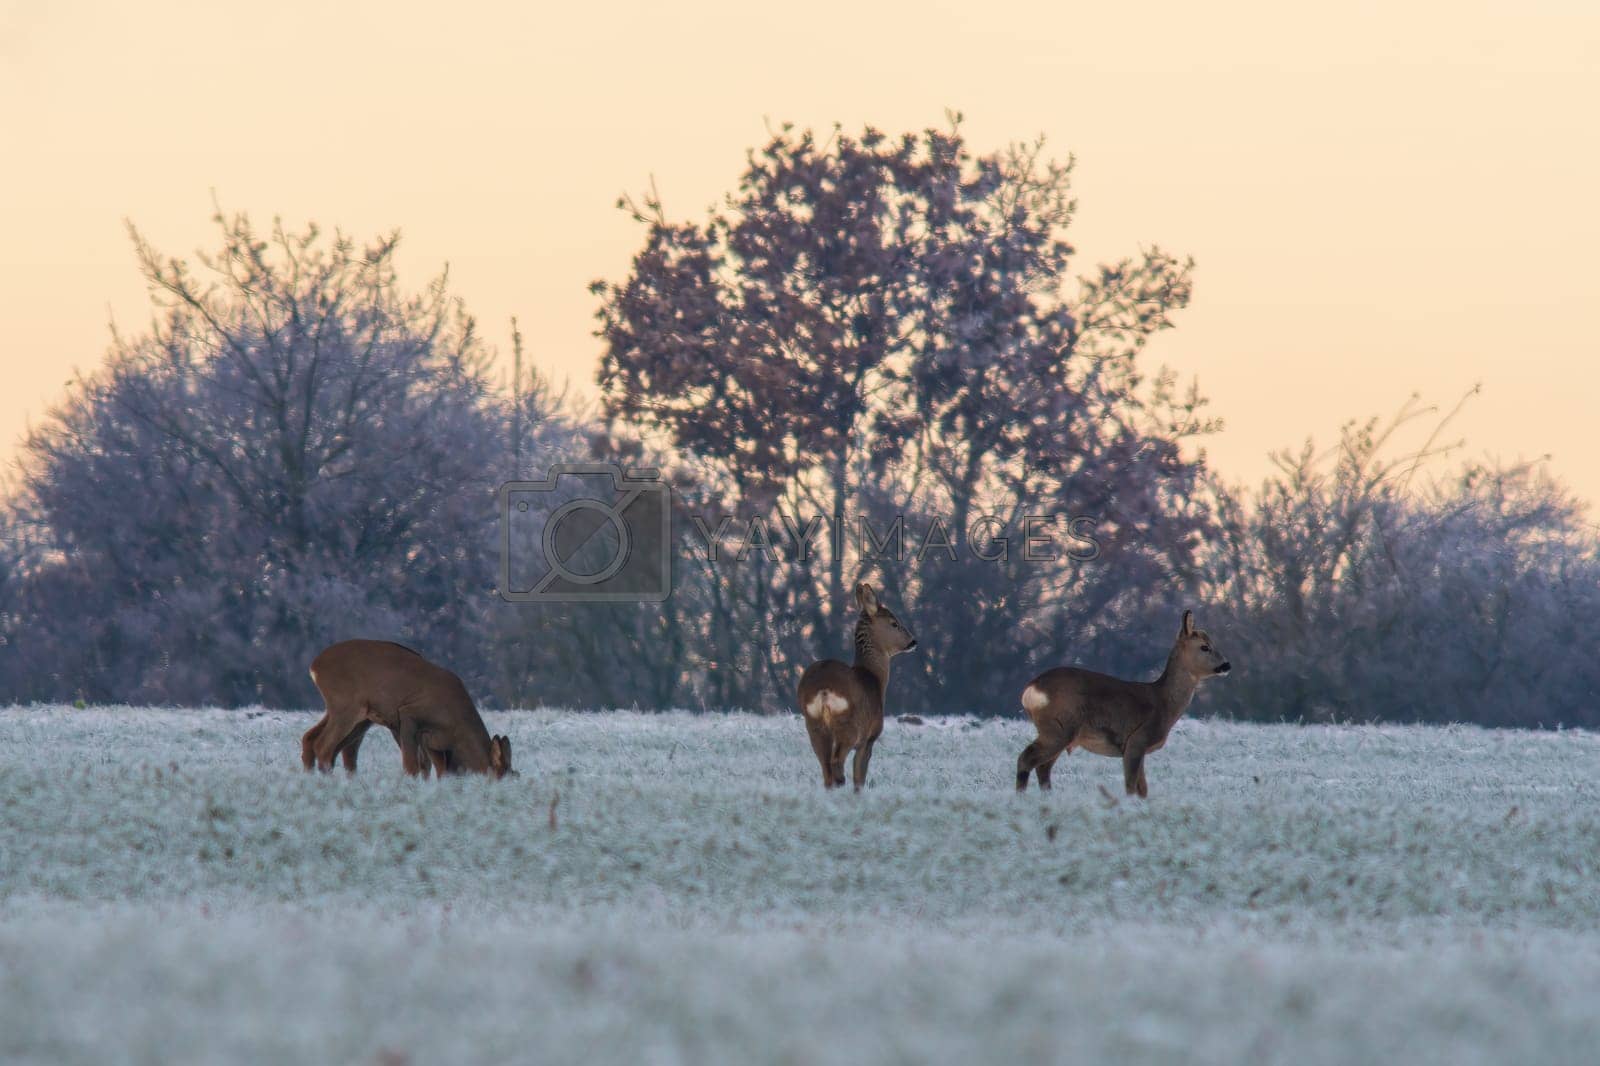 Royalty free image of one group of deer in a field in winter by mario_plechaty_photography